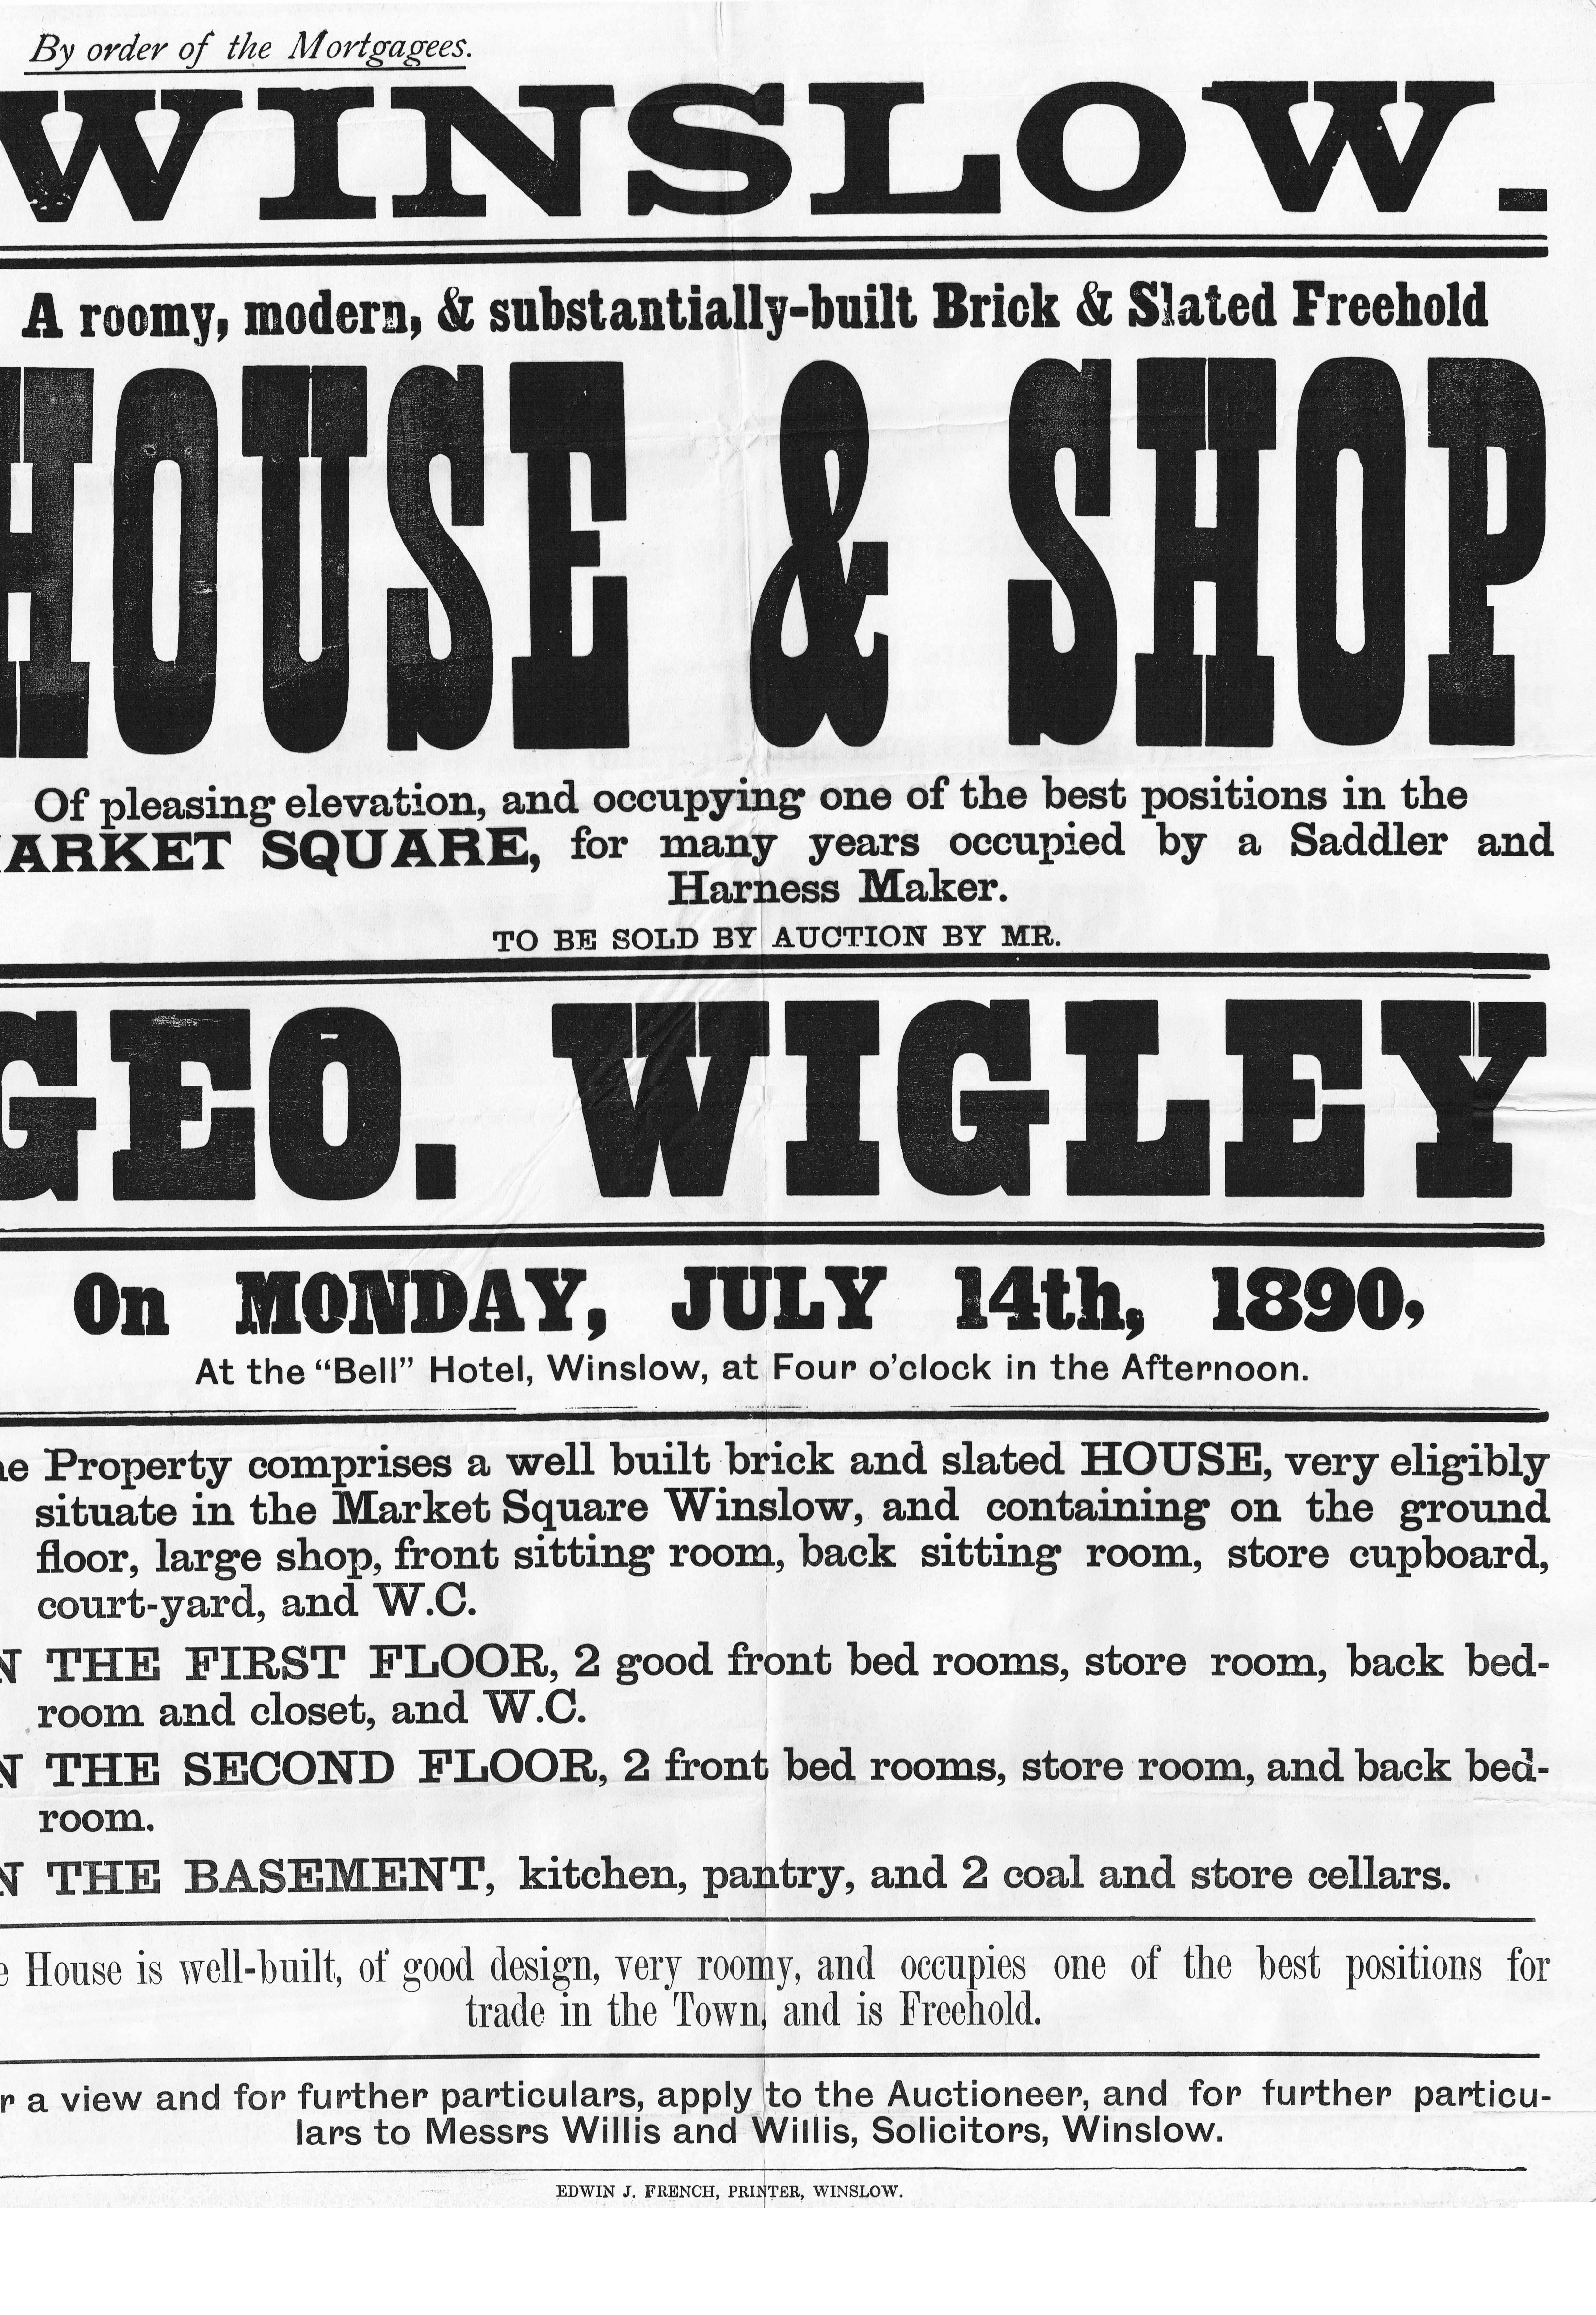 Sale poster, 1890